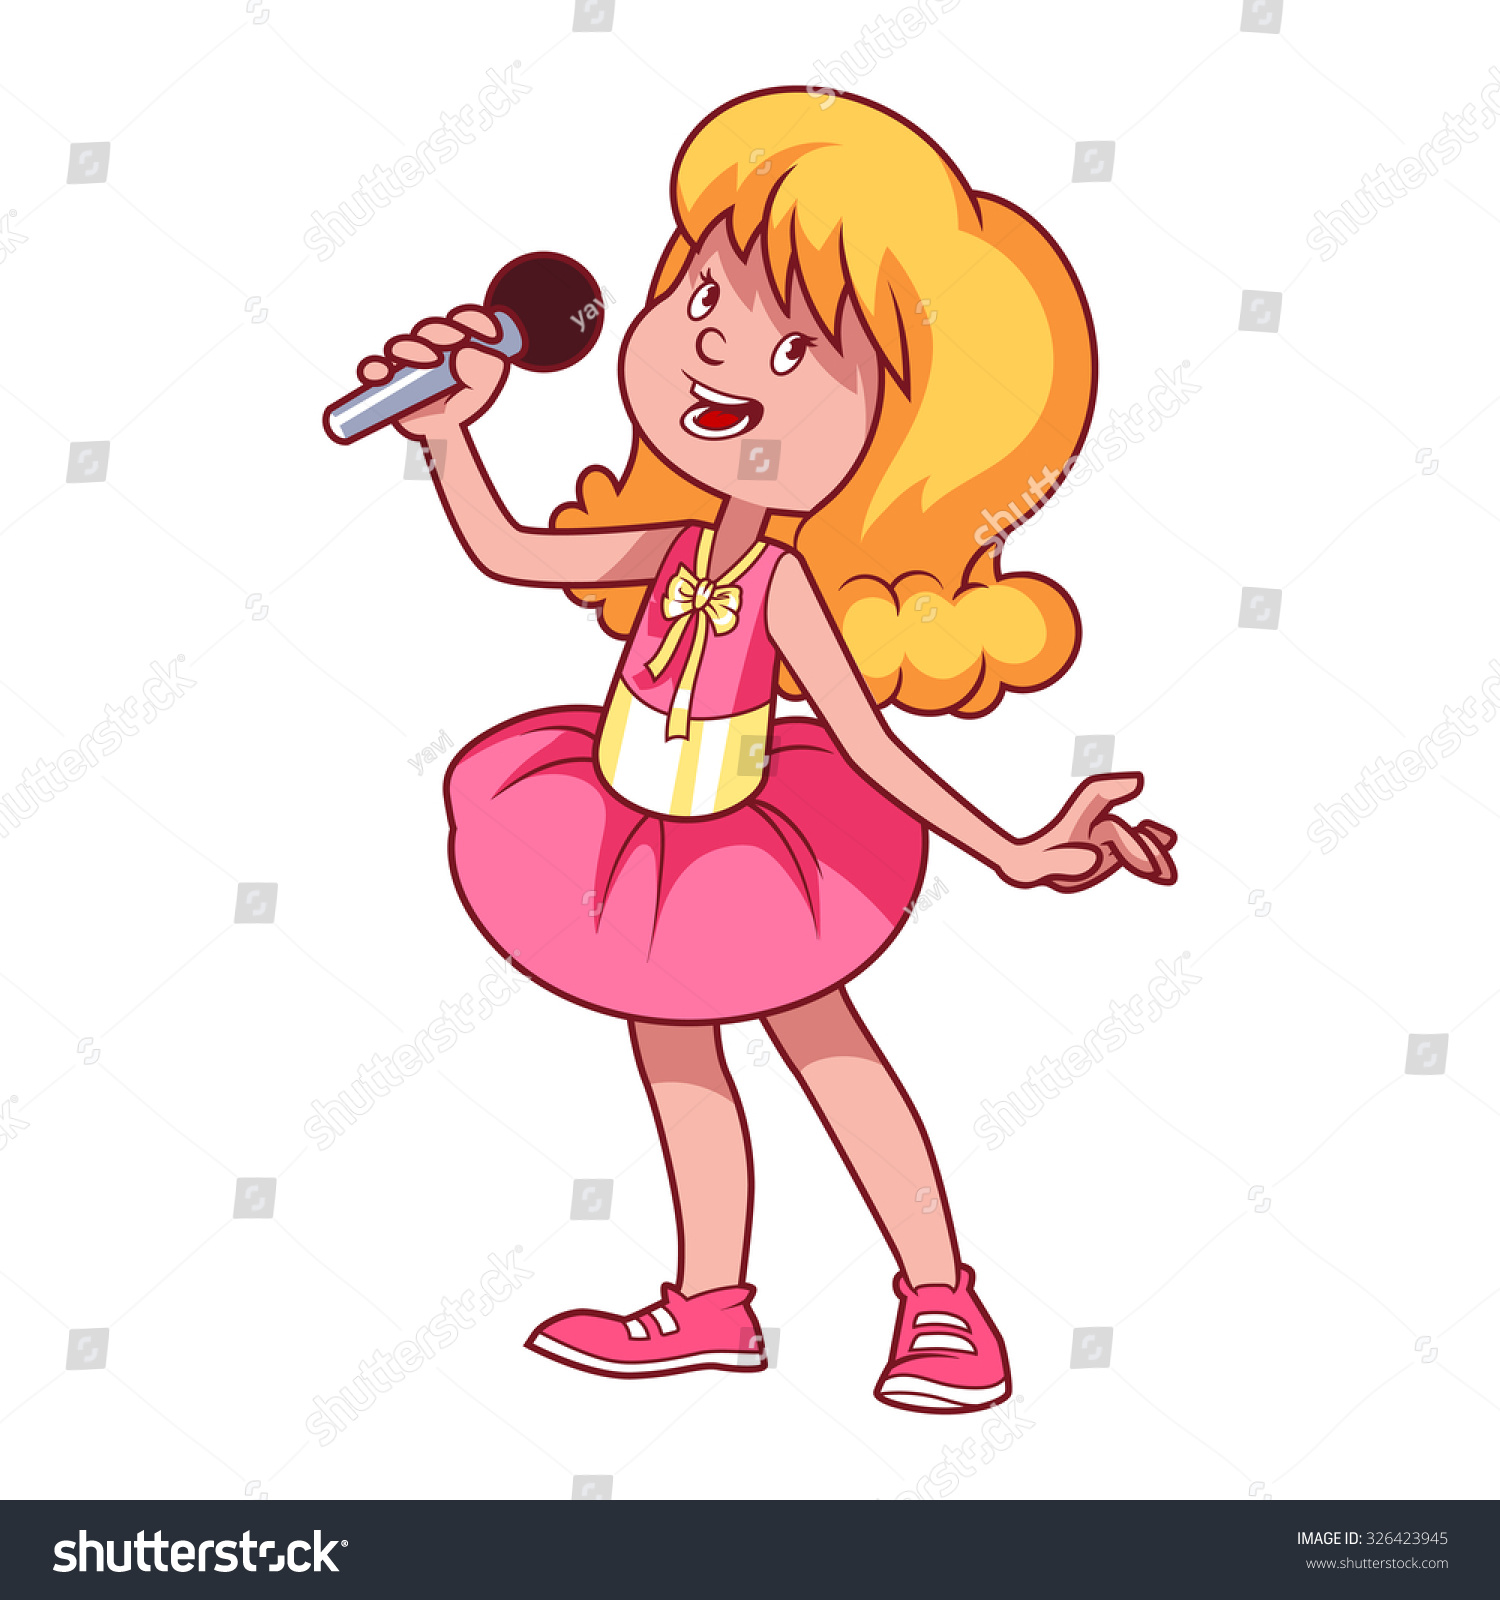 Girl Singing With Microphone Vector Clip Art Illustration On A White Background Cartoon